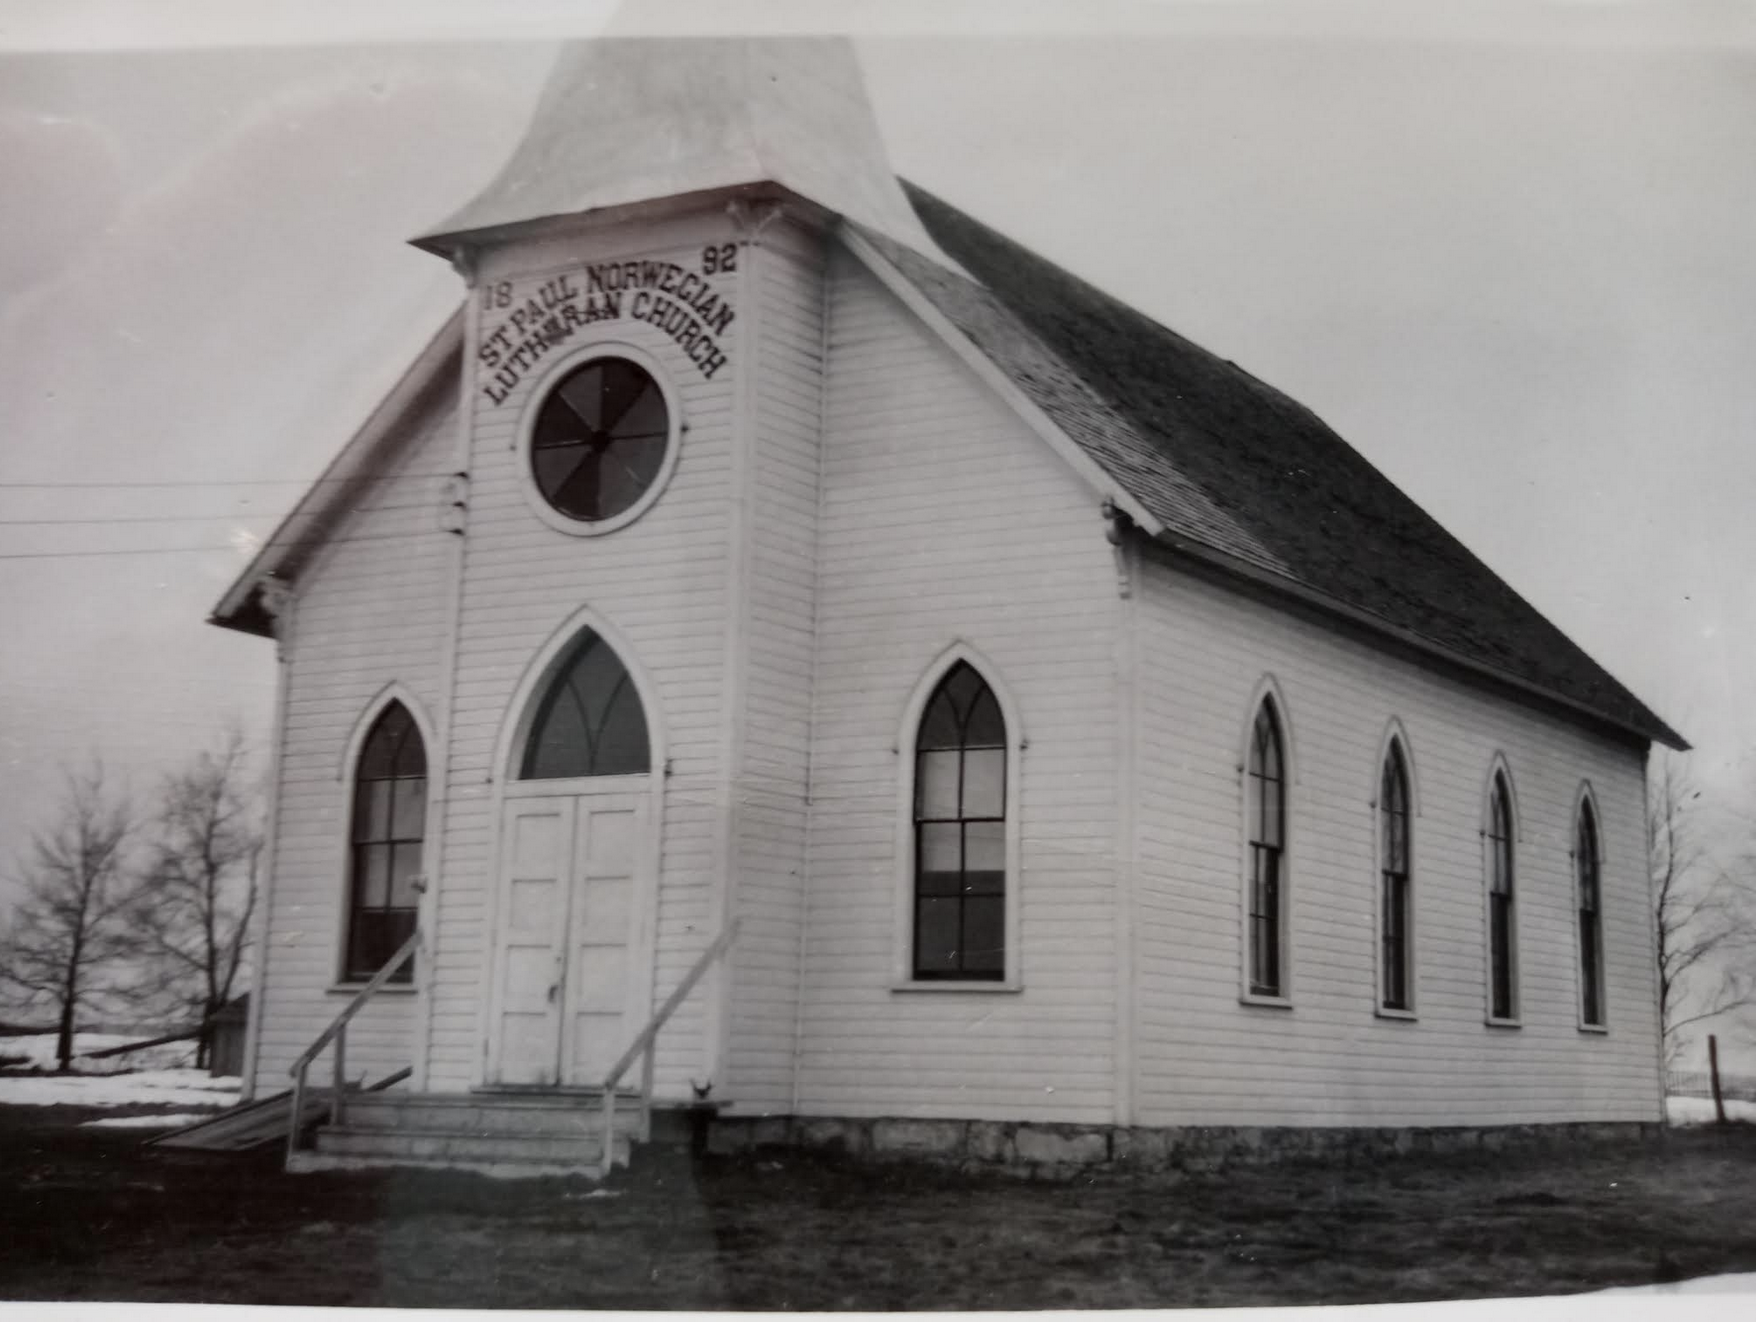 This was the St. Paul Norwegian Lutheran Church at North 26th and Hamilton in 1892 where the German St. Paul Lutheran Church congregation first met. Thanks to Lorinda Ash for sharing it!